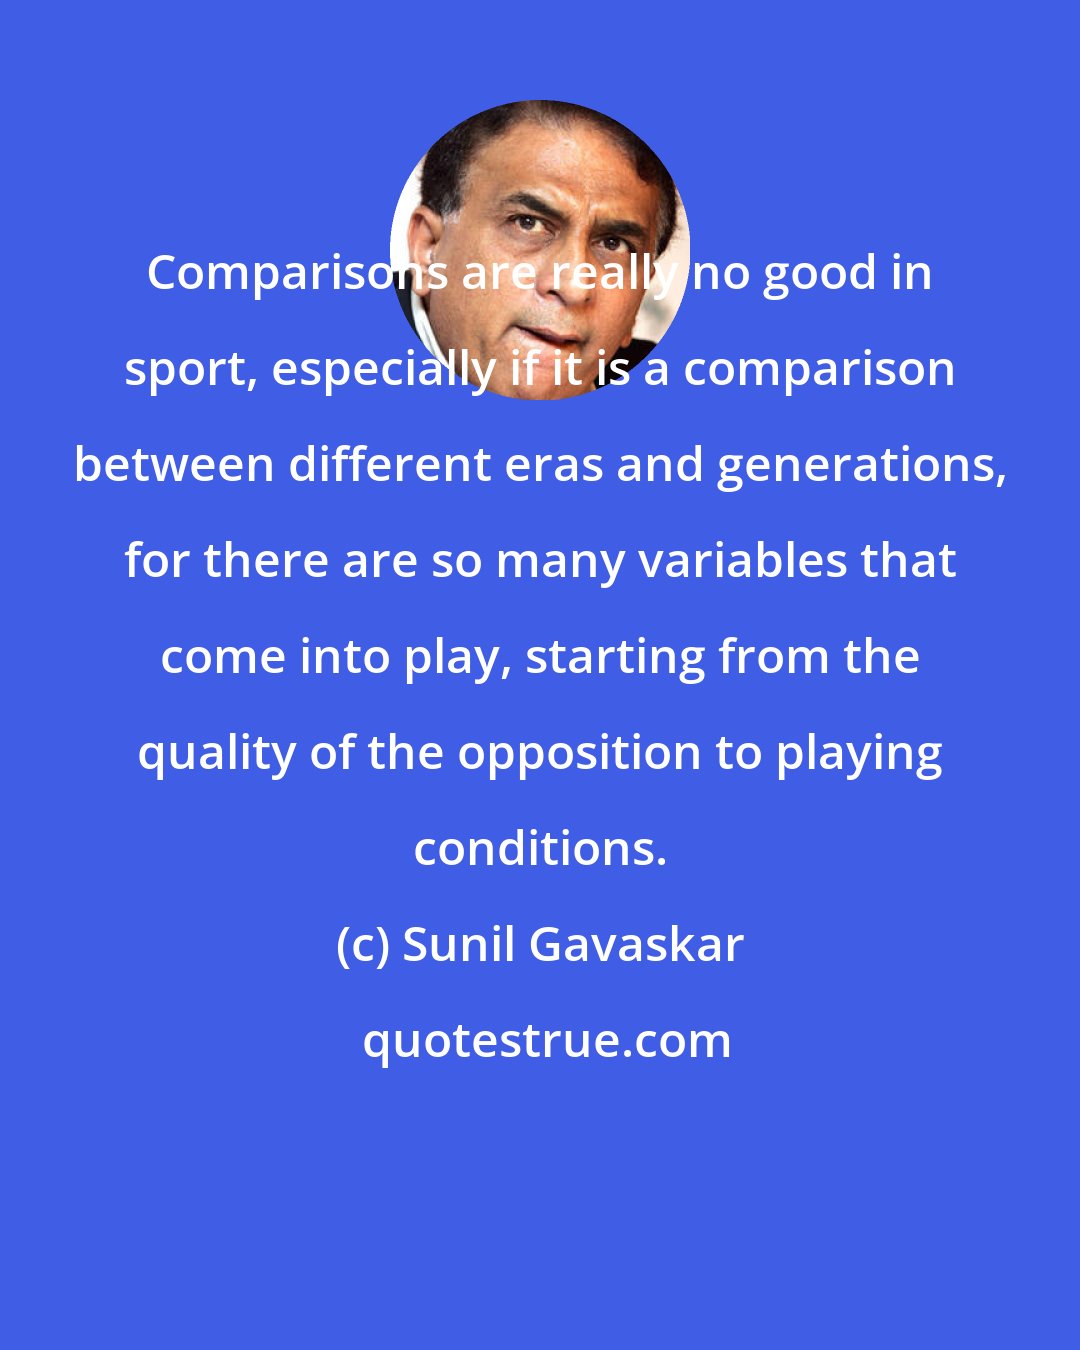 Sunil Gavaskar: Comparisons are really no good in sport, especially if it is a comparison between different eras and generations, for there are so many variables that come into play, starting from the quality of the opposition to playing conditions.